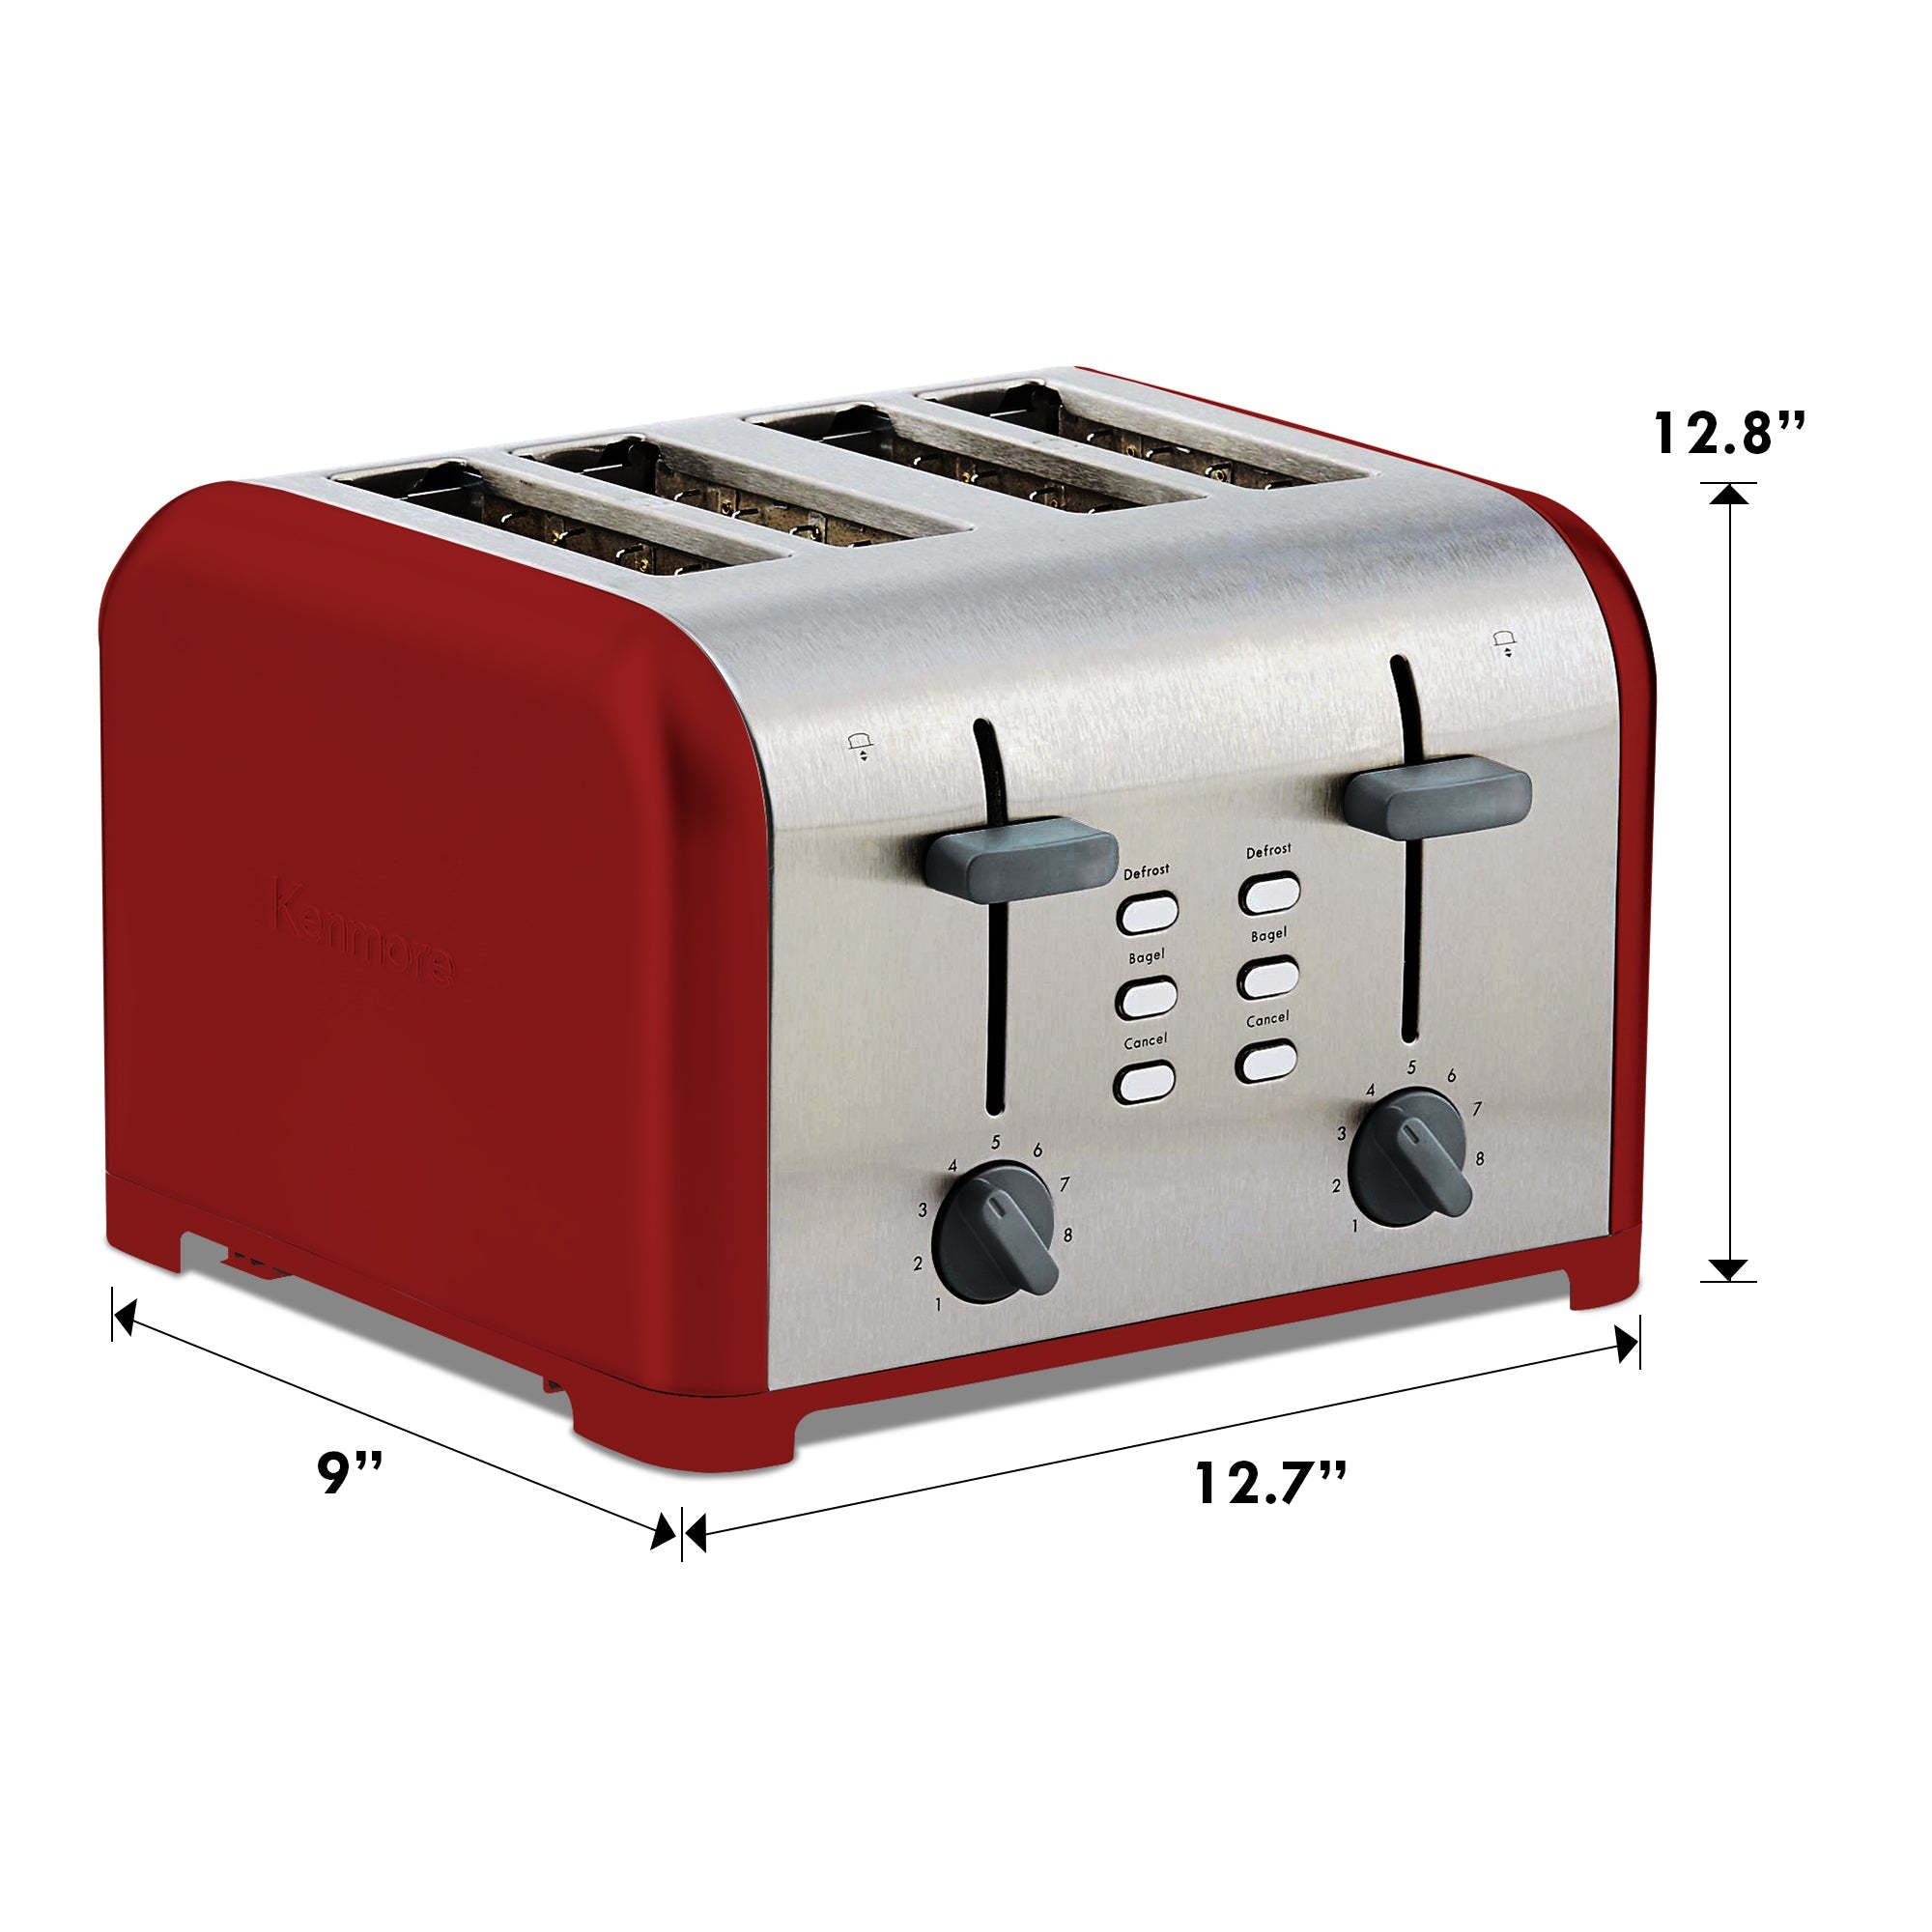 Product shot of Kenmore 4-slice red stainless steel toaster on a white background with dimensions labeled